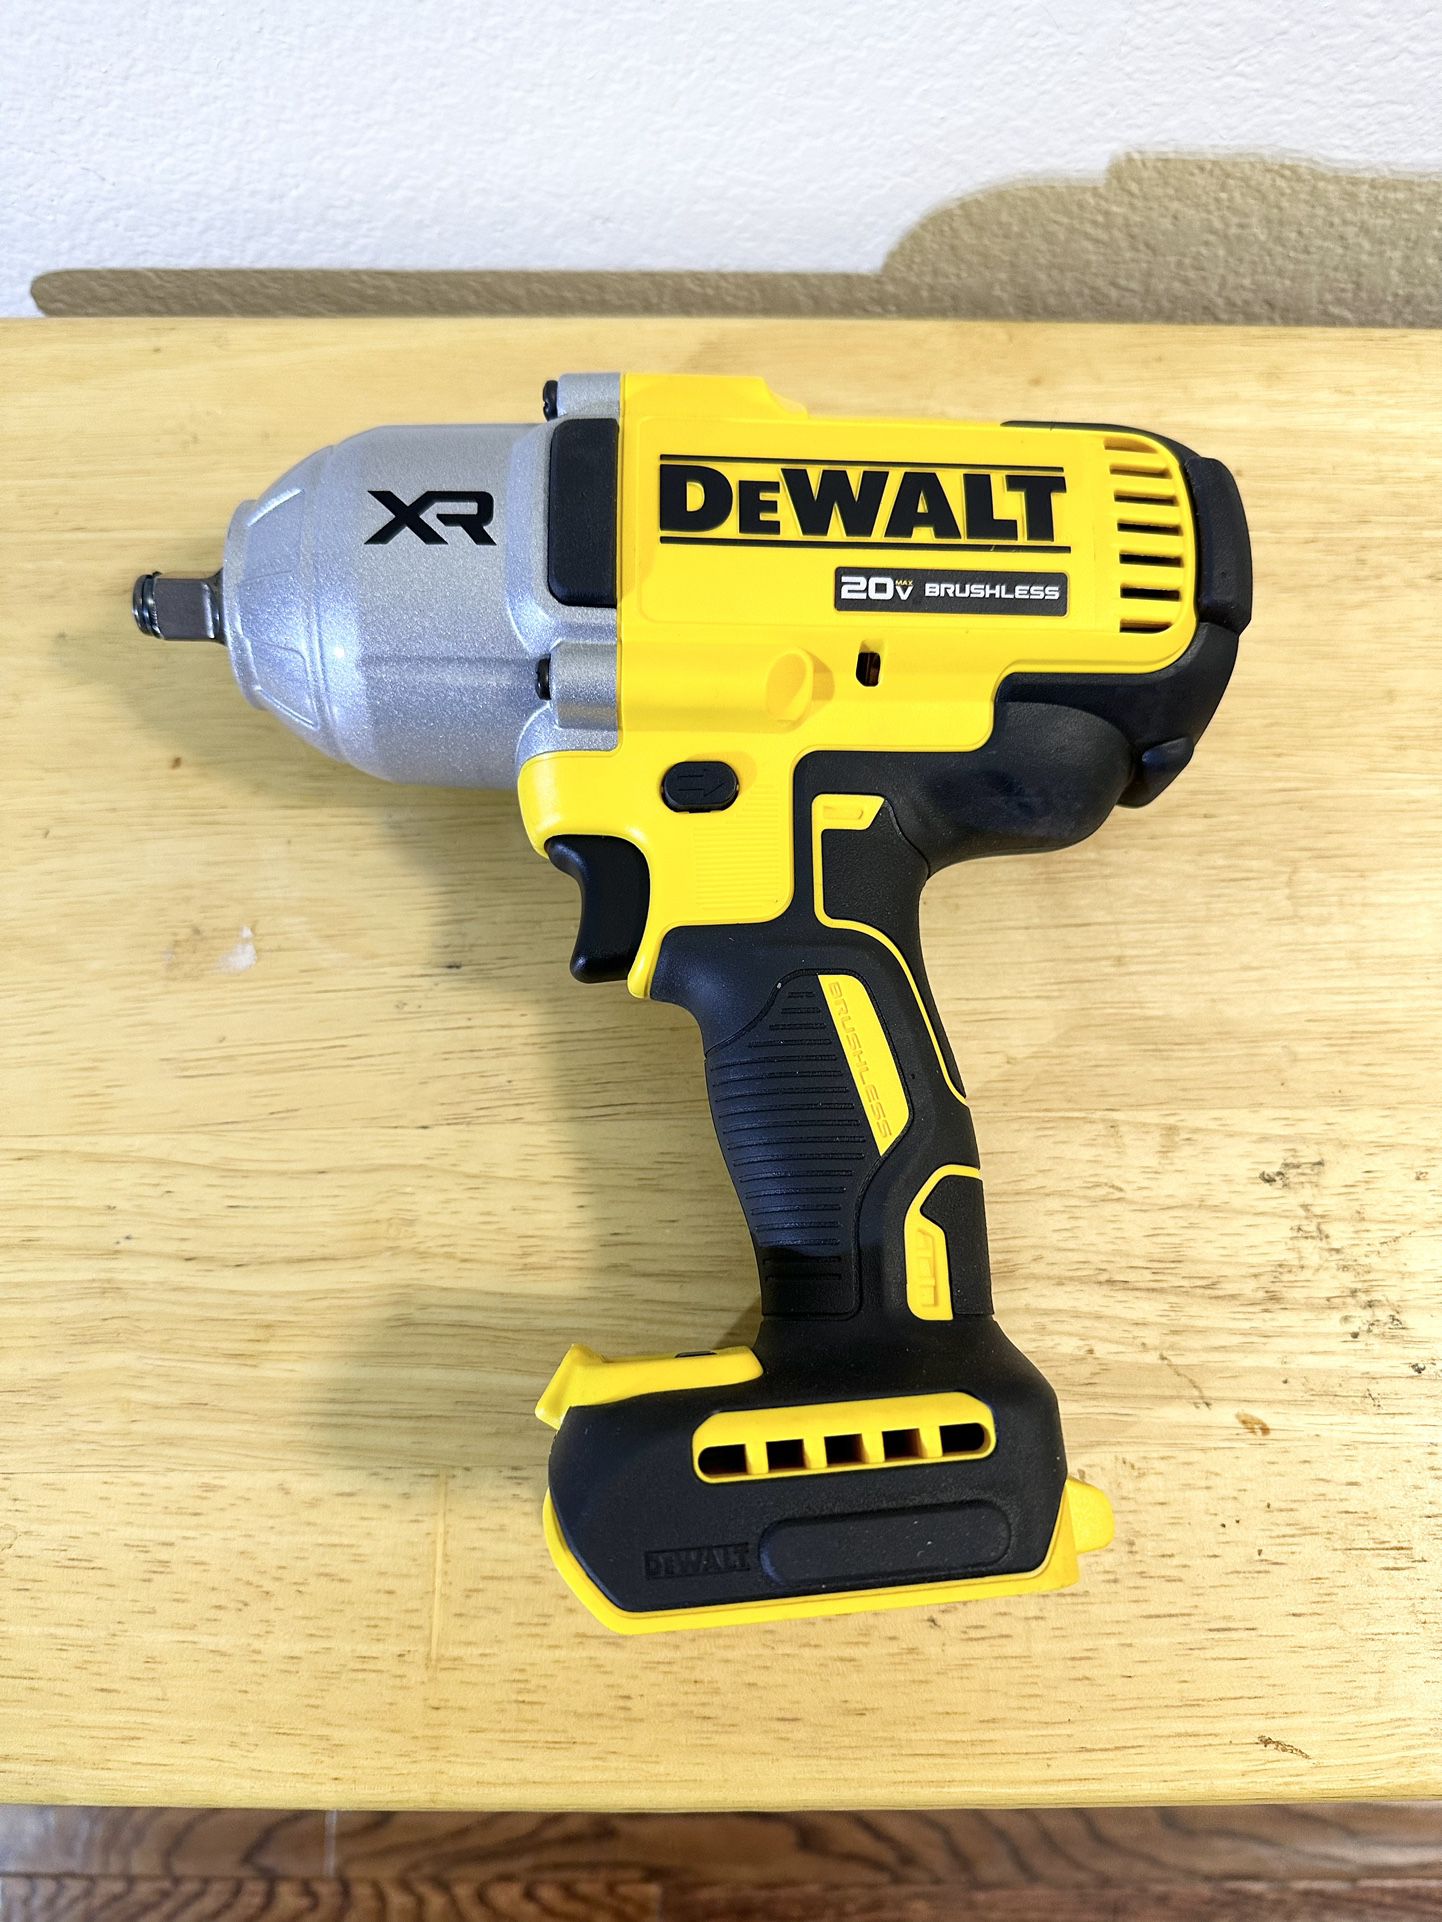 DEWALT 20V MAX Cordless 1/2 in. Impact Wrench (Tool Only)